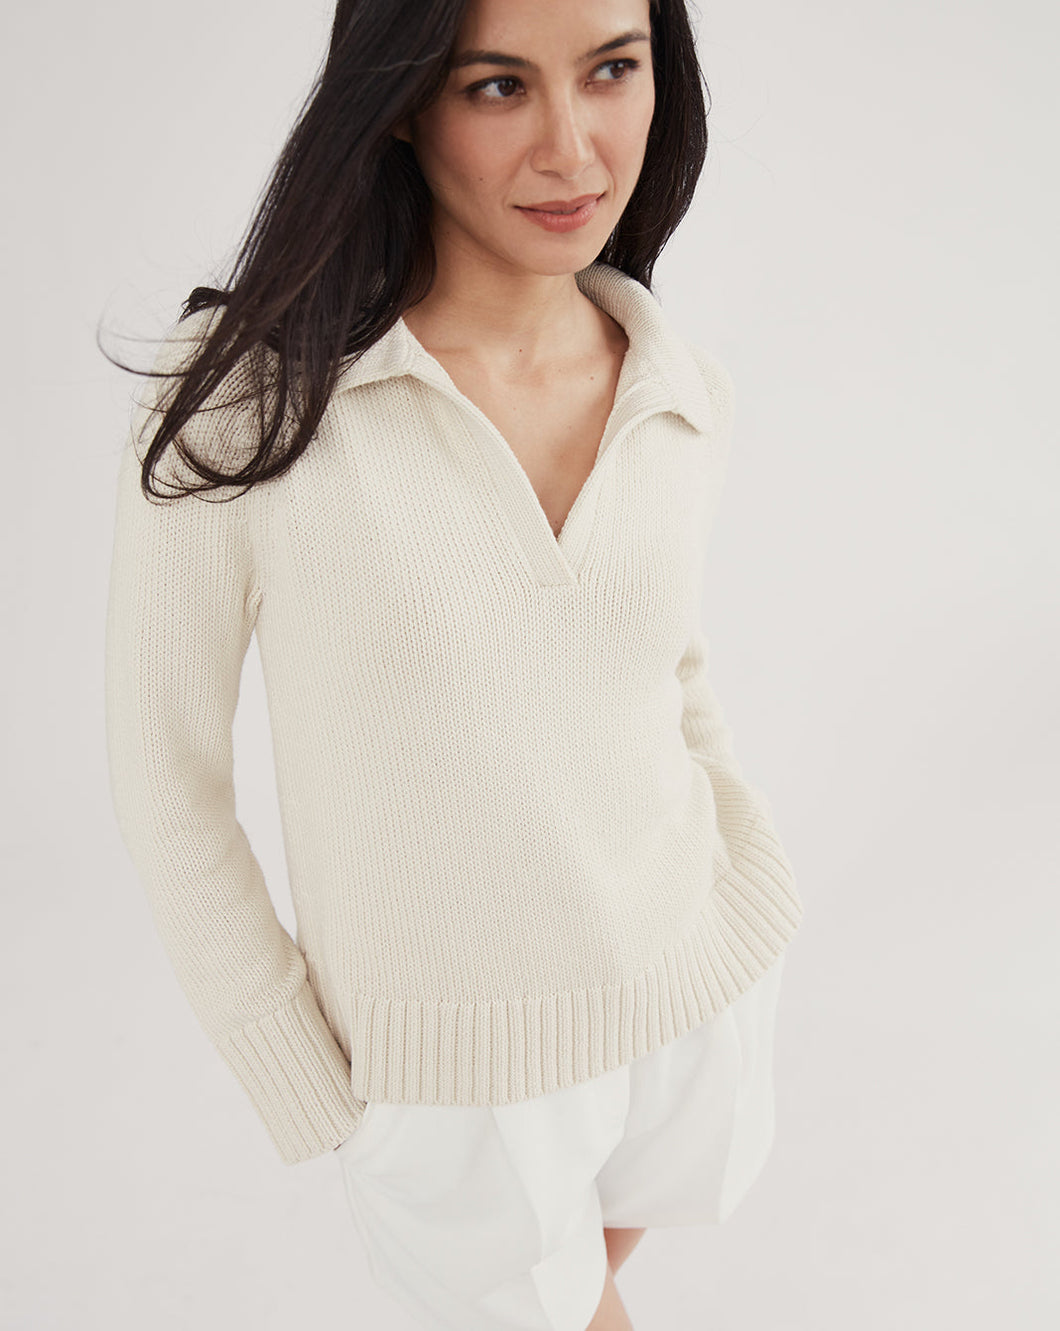 State of Cotton Avery Cotton Polo Neck Sweater